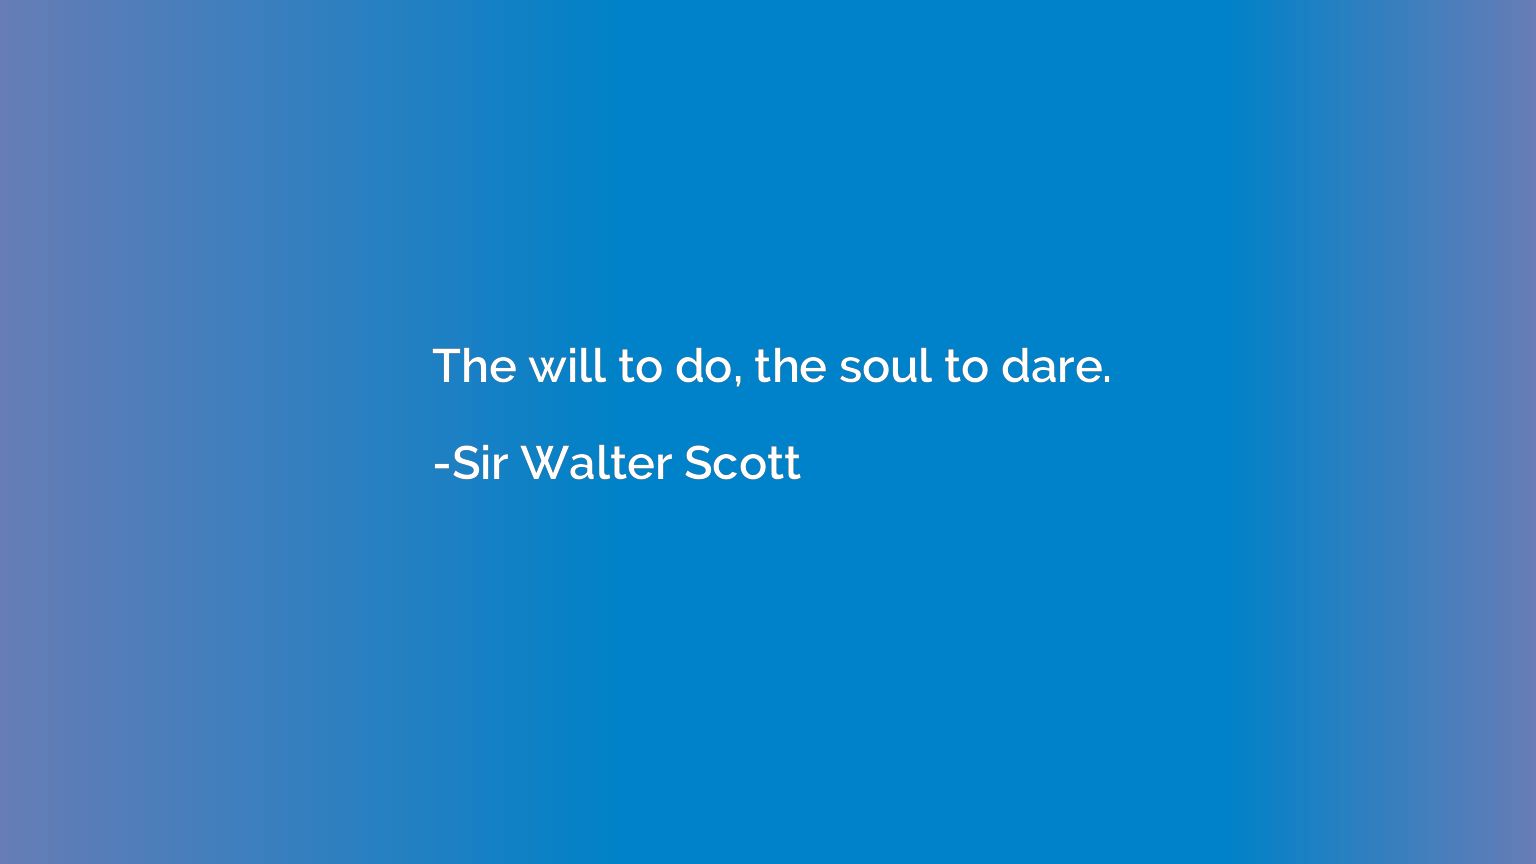 The will to do, the soul to dare.